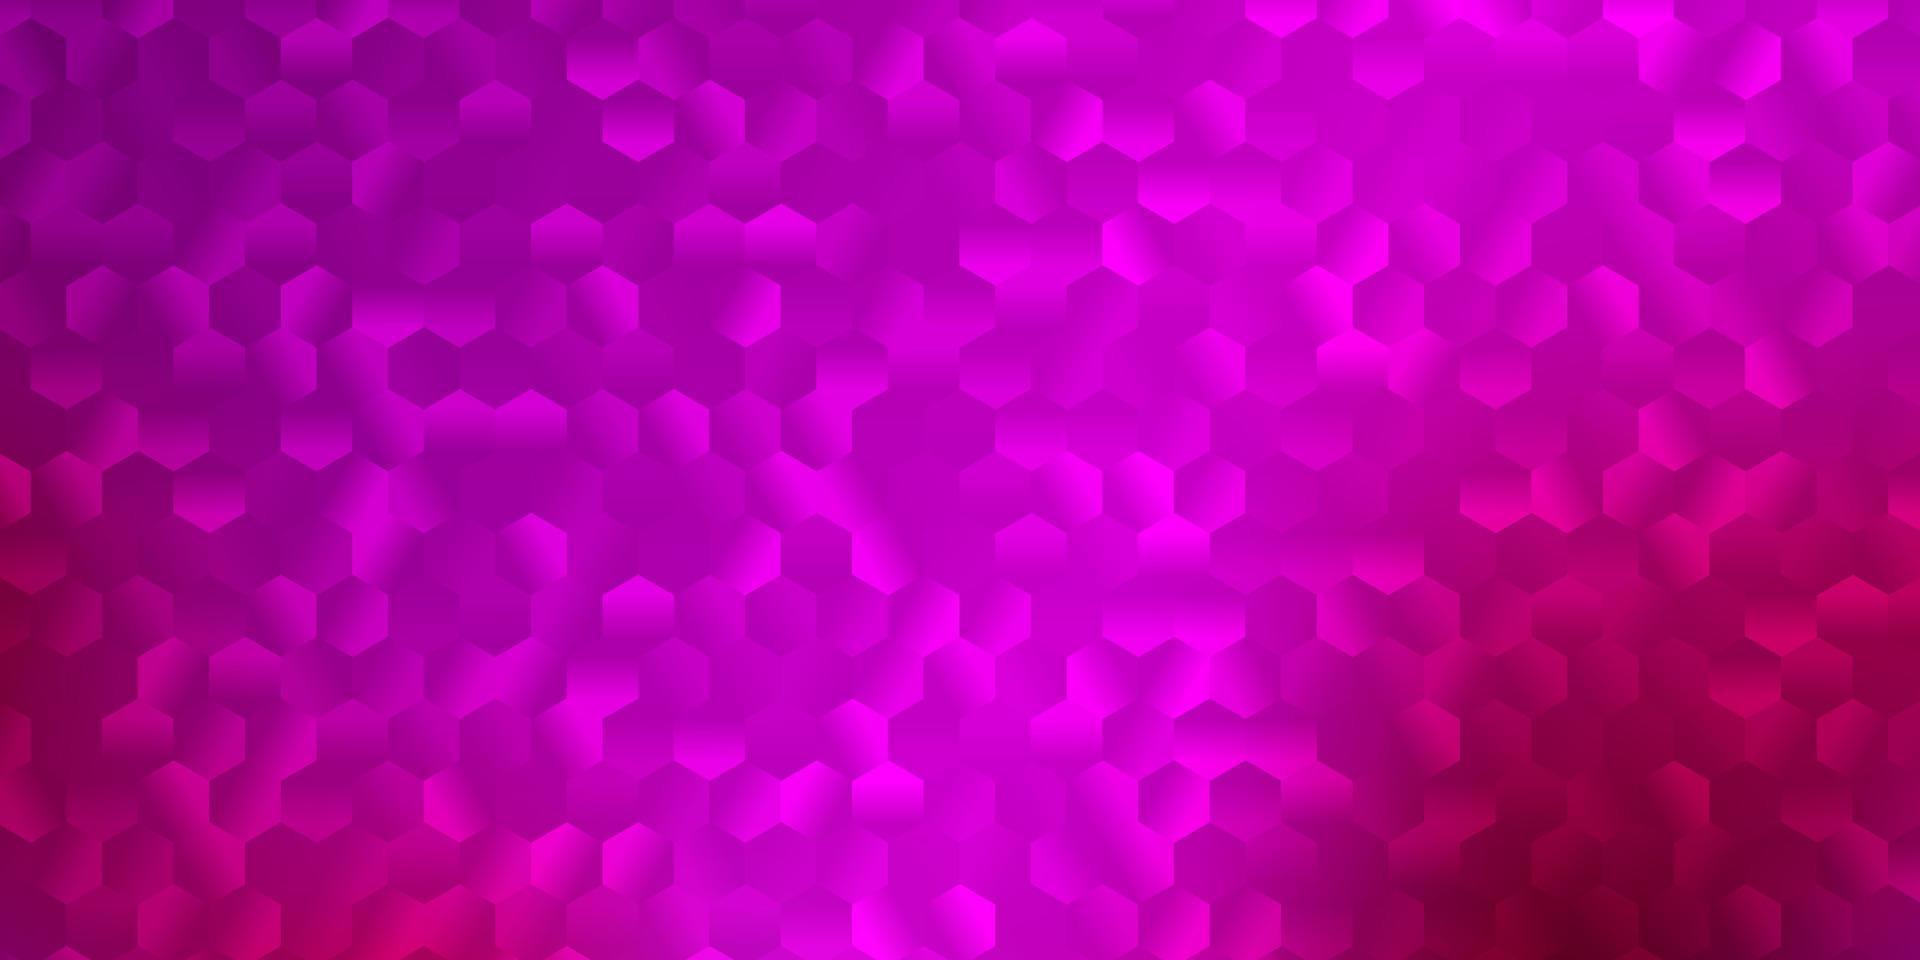 Light pink vector layout with shapes of hexagons.